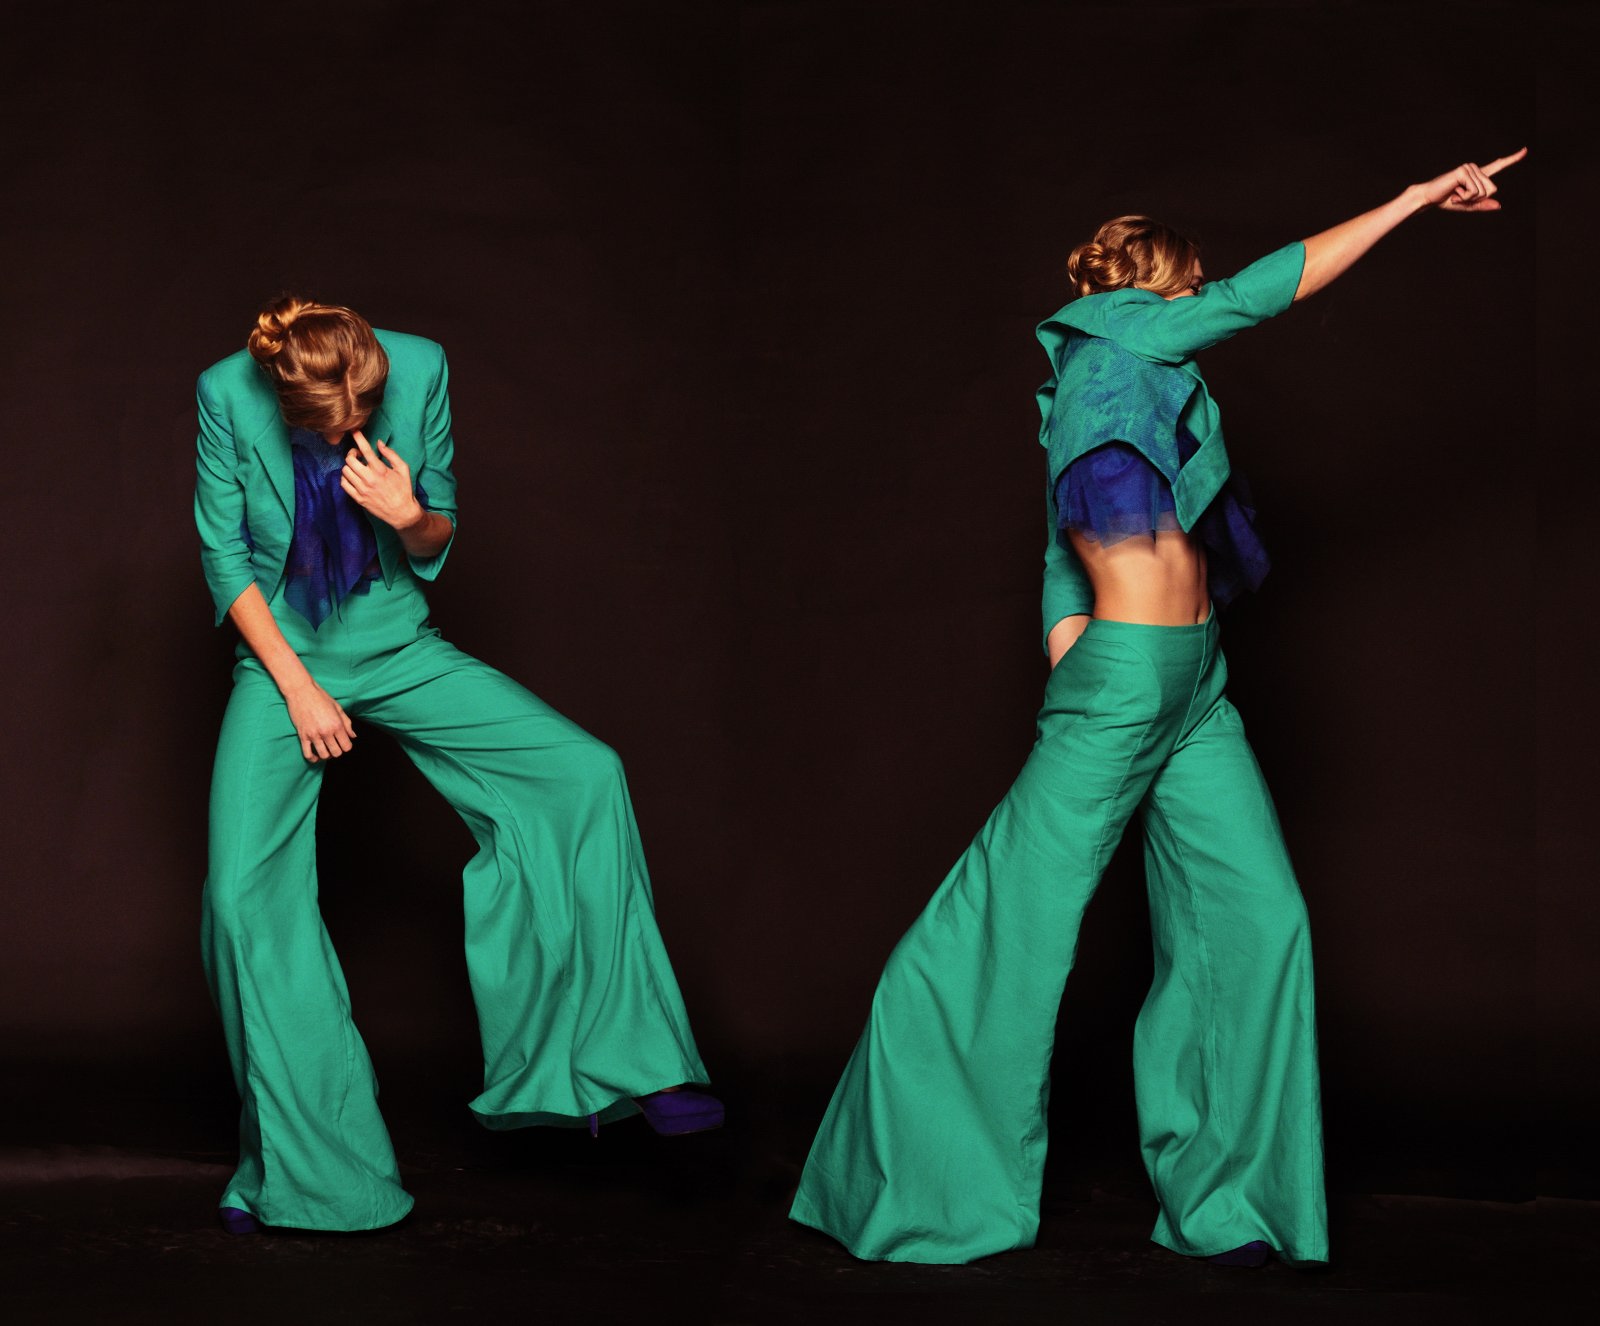 Movement and action fashion photography. Green Pants Suit with Jacket. High Fashion Shoot Studio photo shoot by Kent Johnson